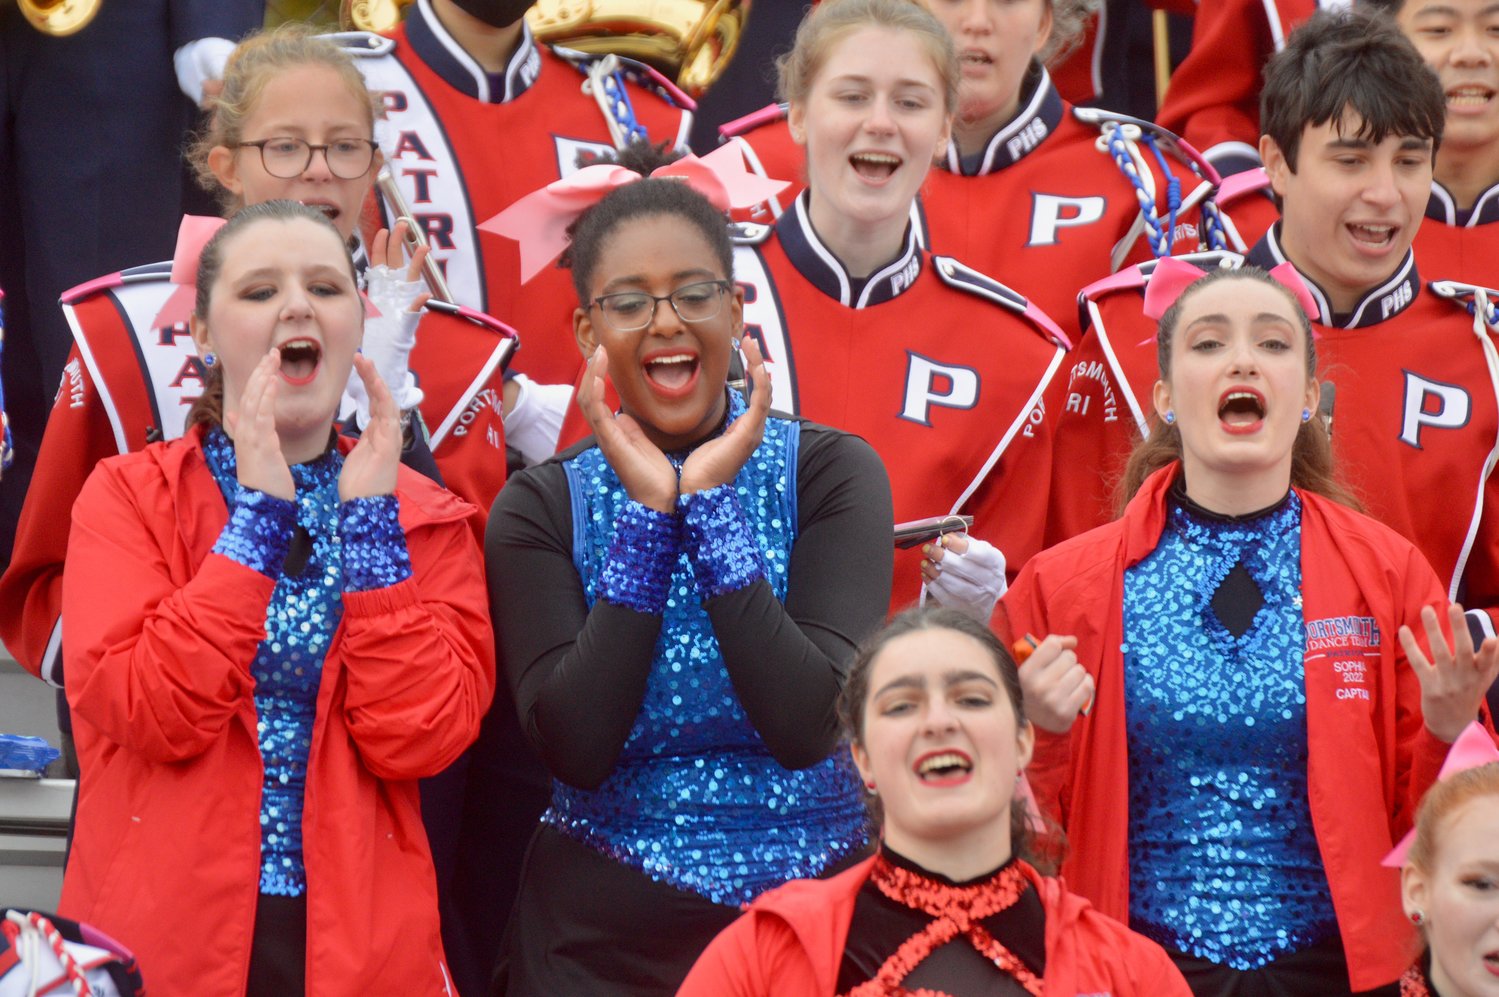 Members of the PHS dance team take part in a call-and-response with the cheerleaders.